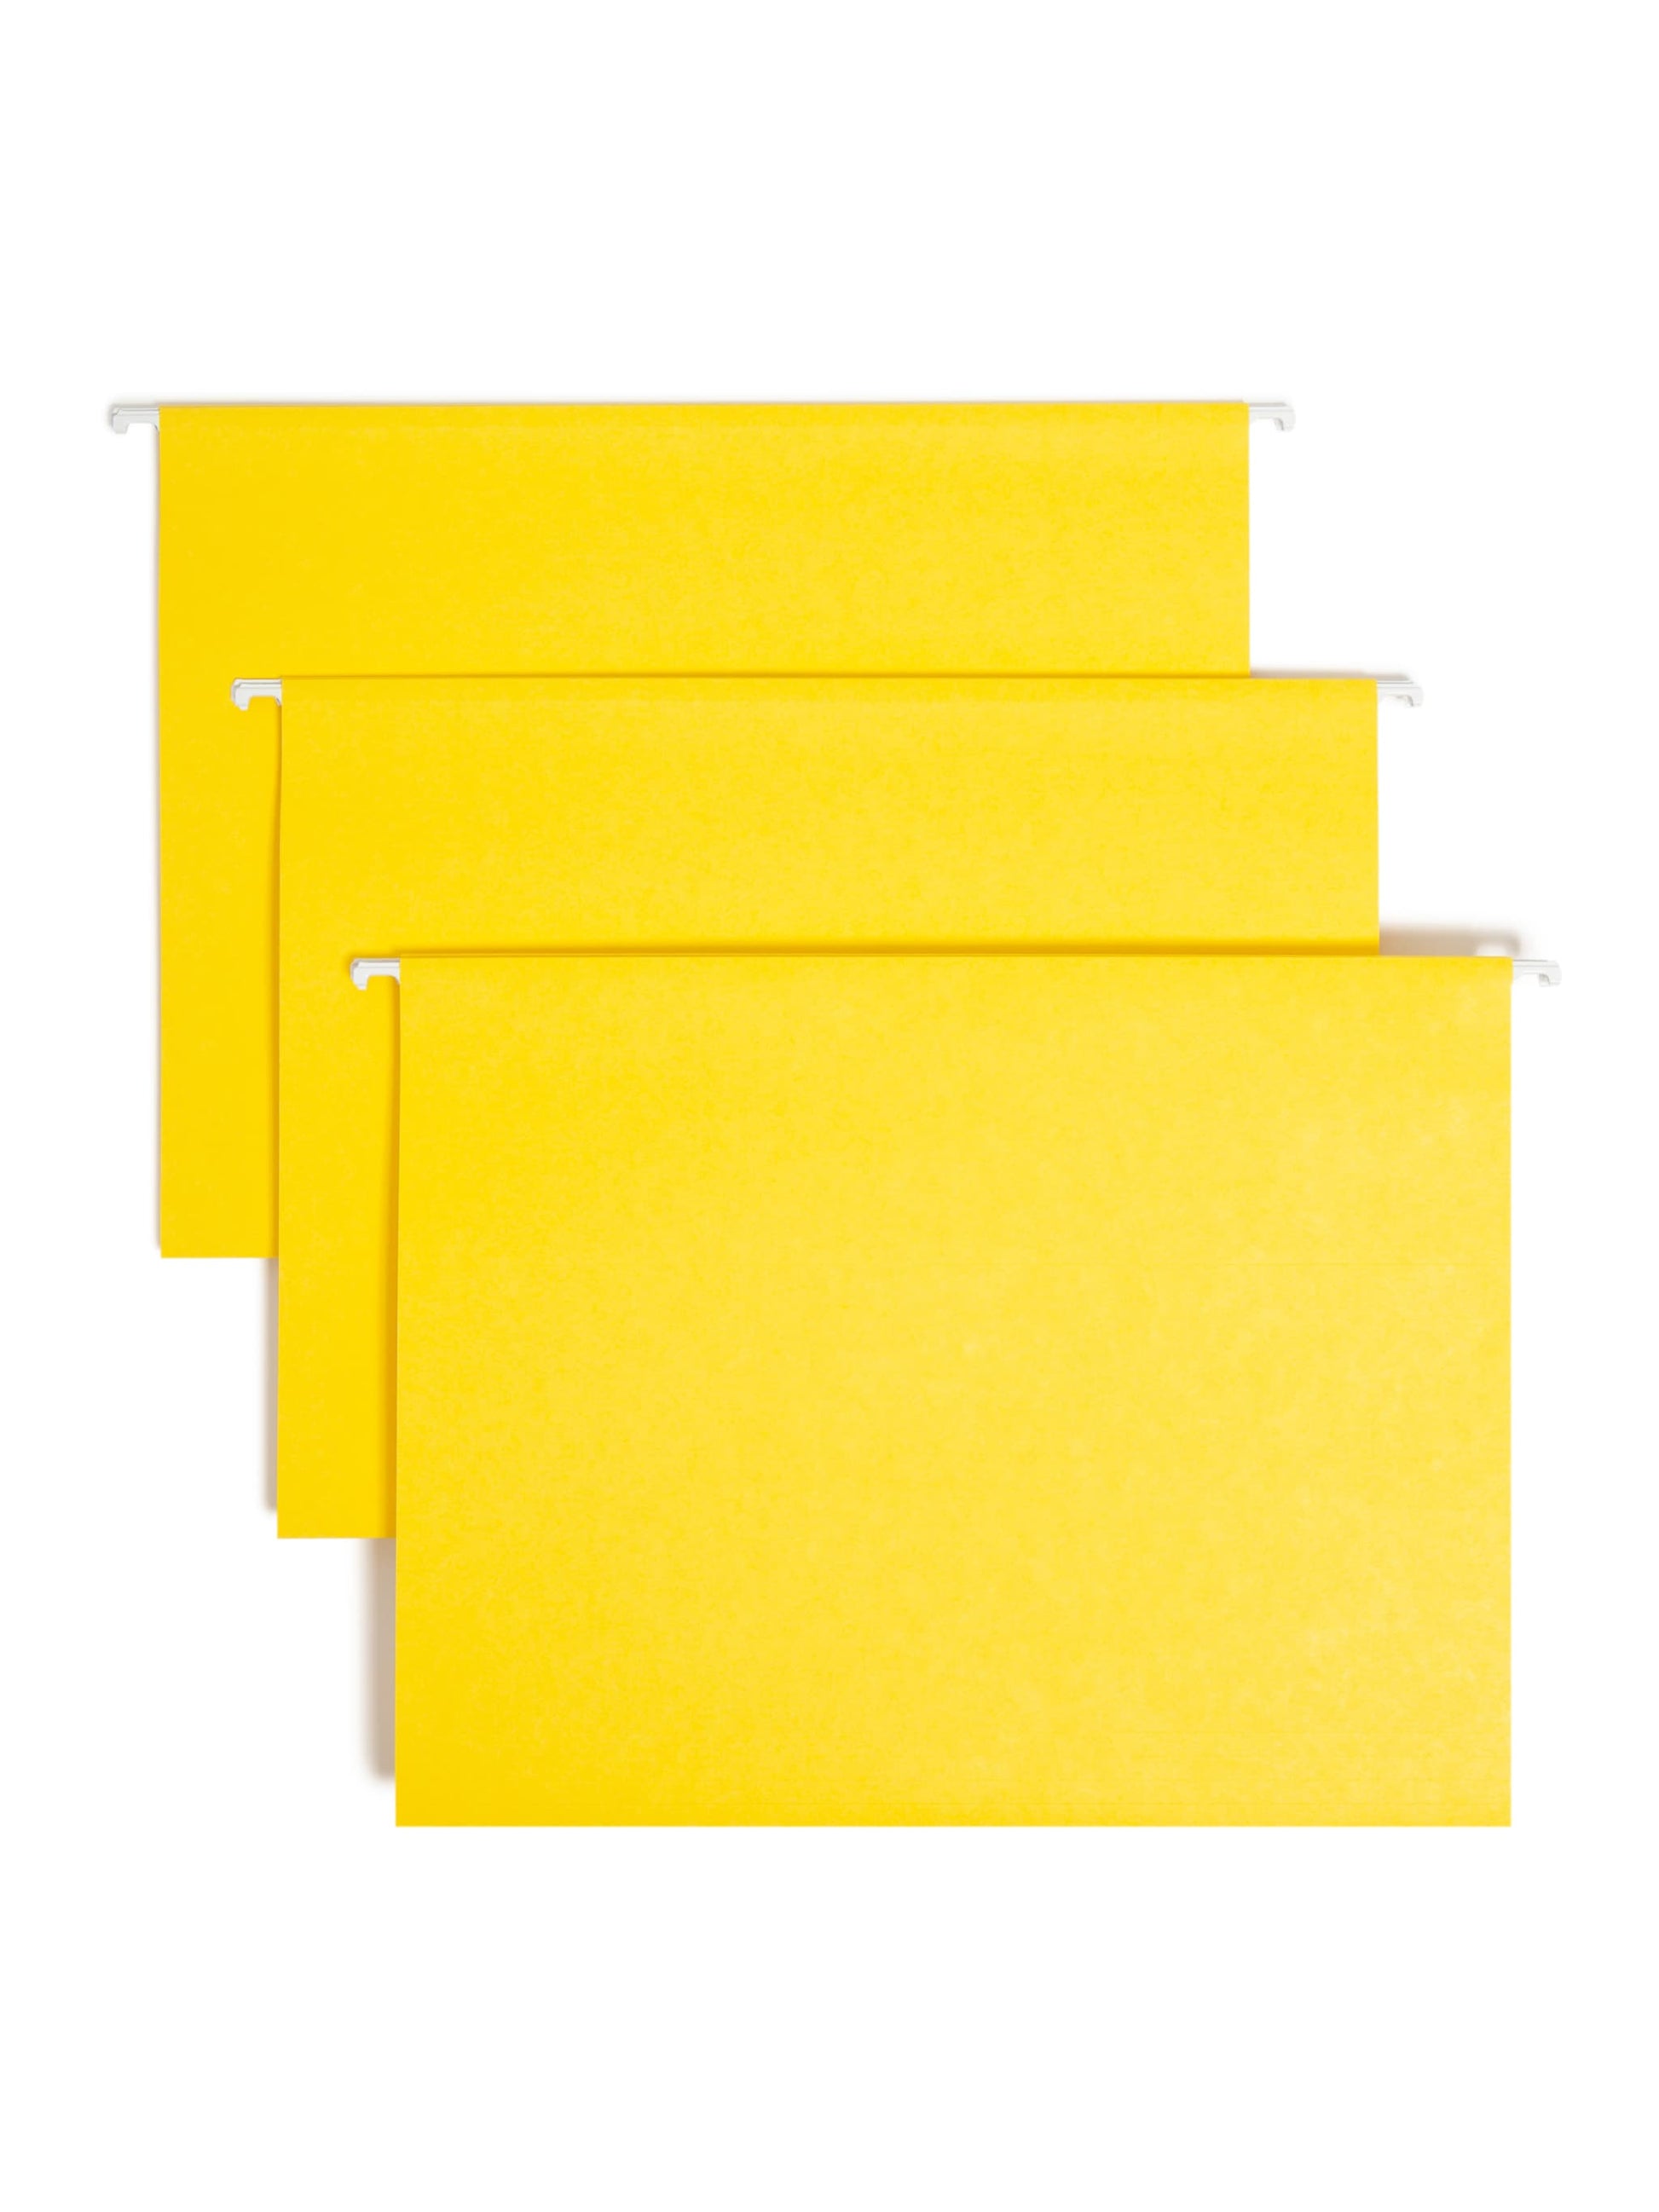 TUFF® Hanging File Folders with Easy Slide® Tabs, Yellow Color, Letter Size, Set of 18, 086486640442